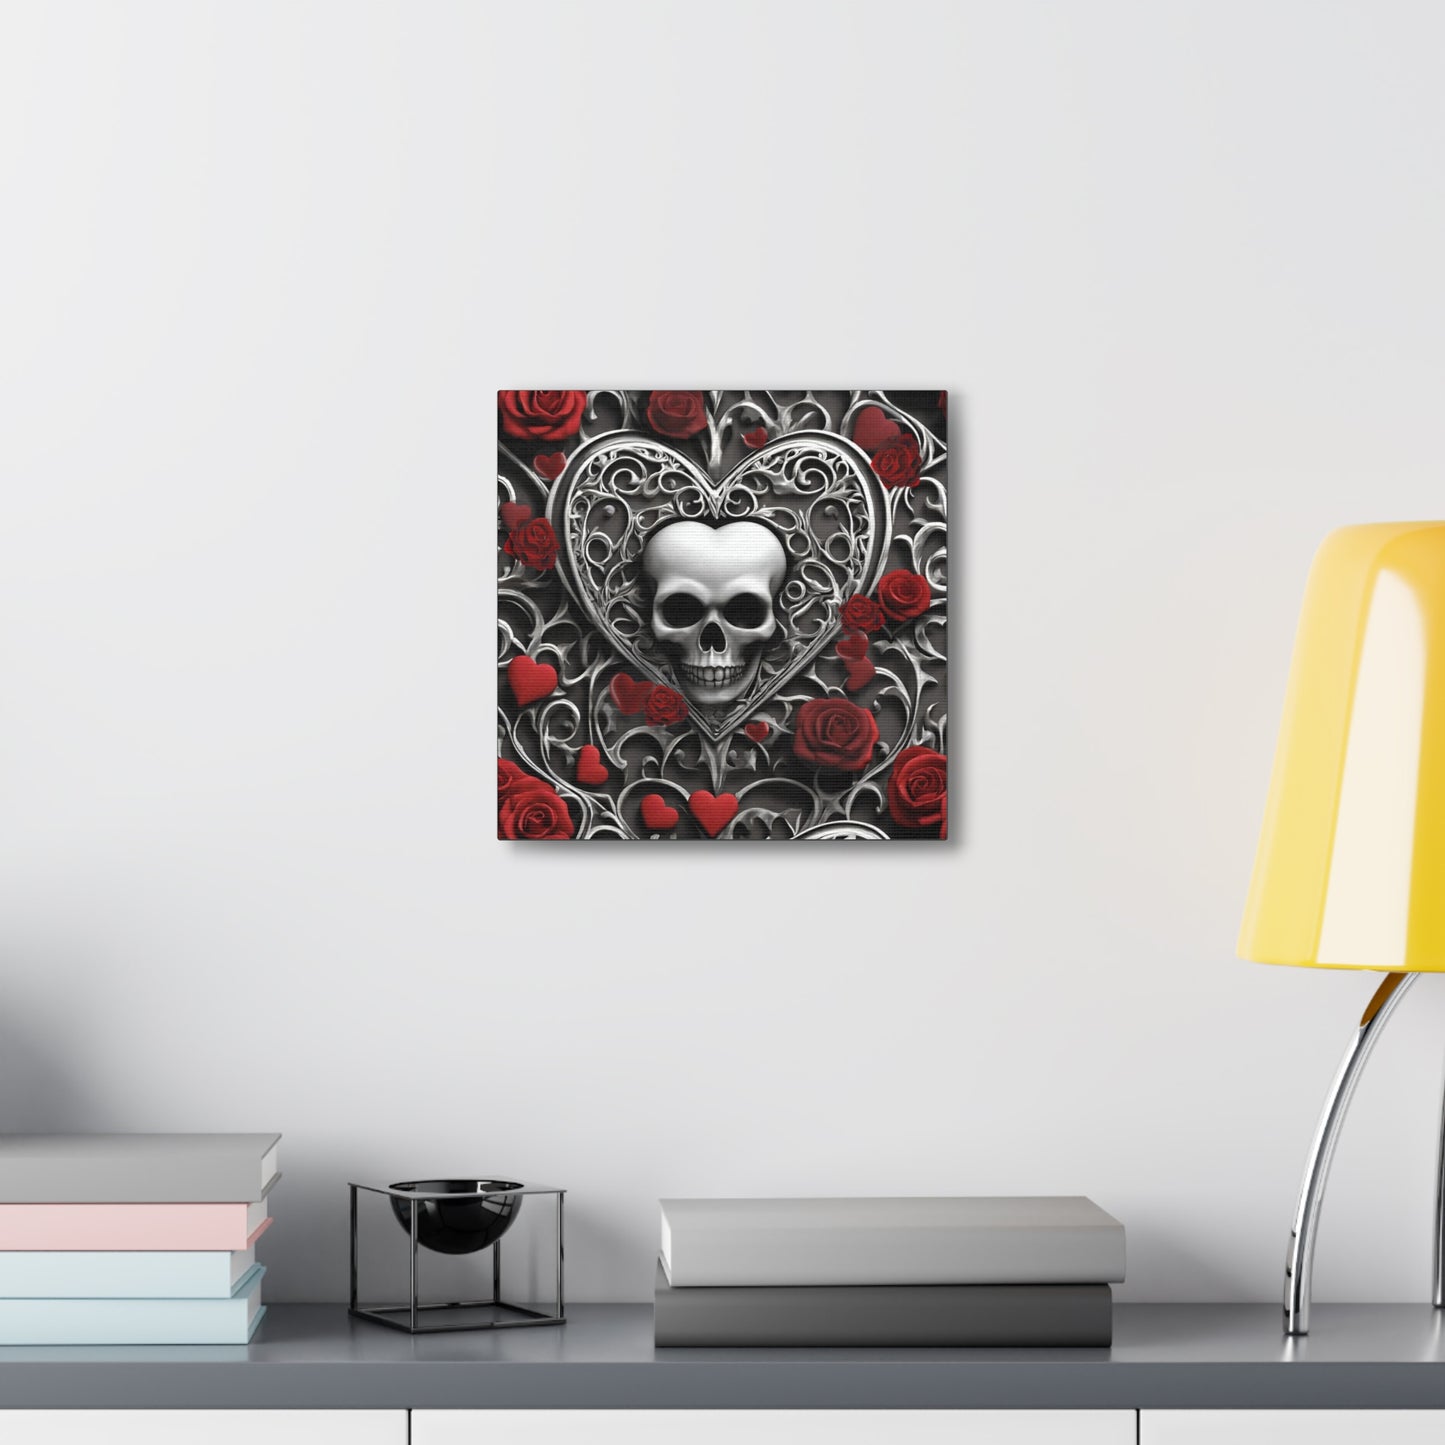 Gothic Hearts Canvas Gallery Wraps